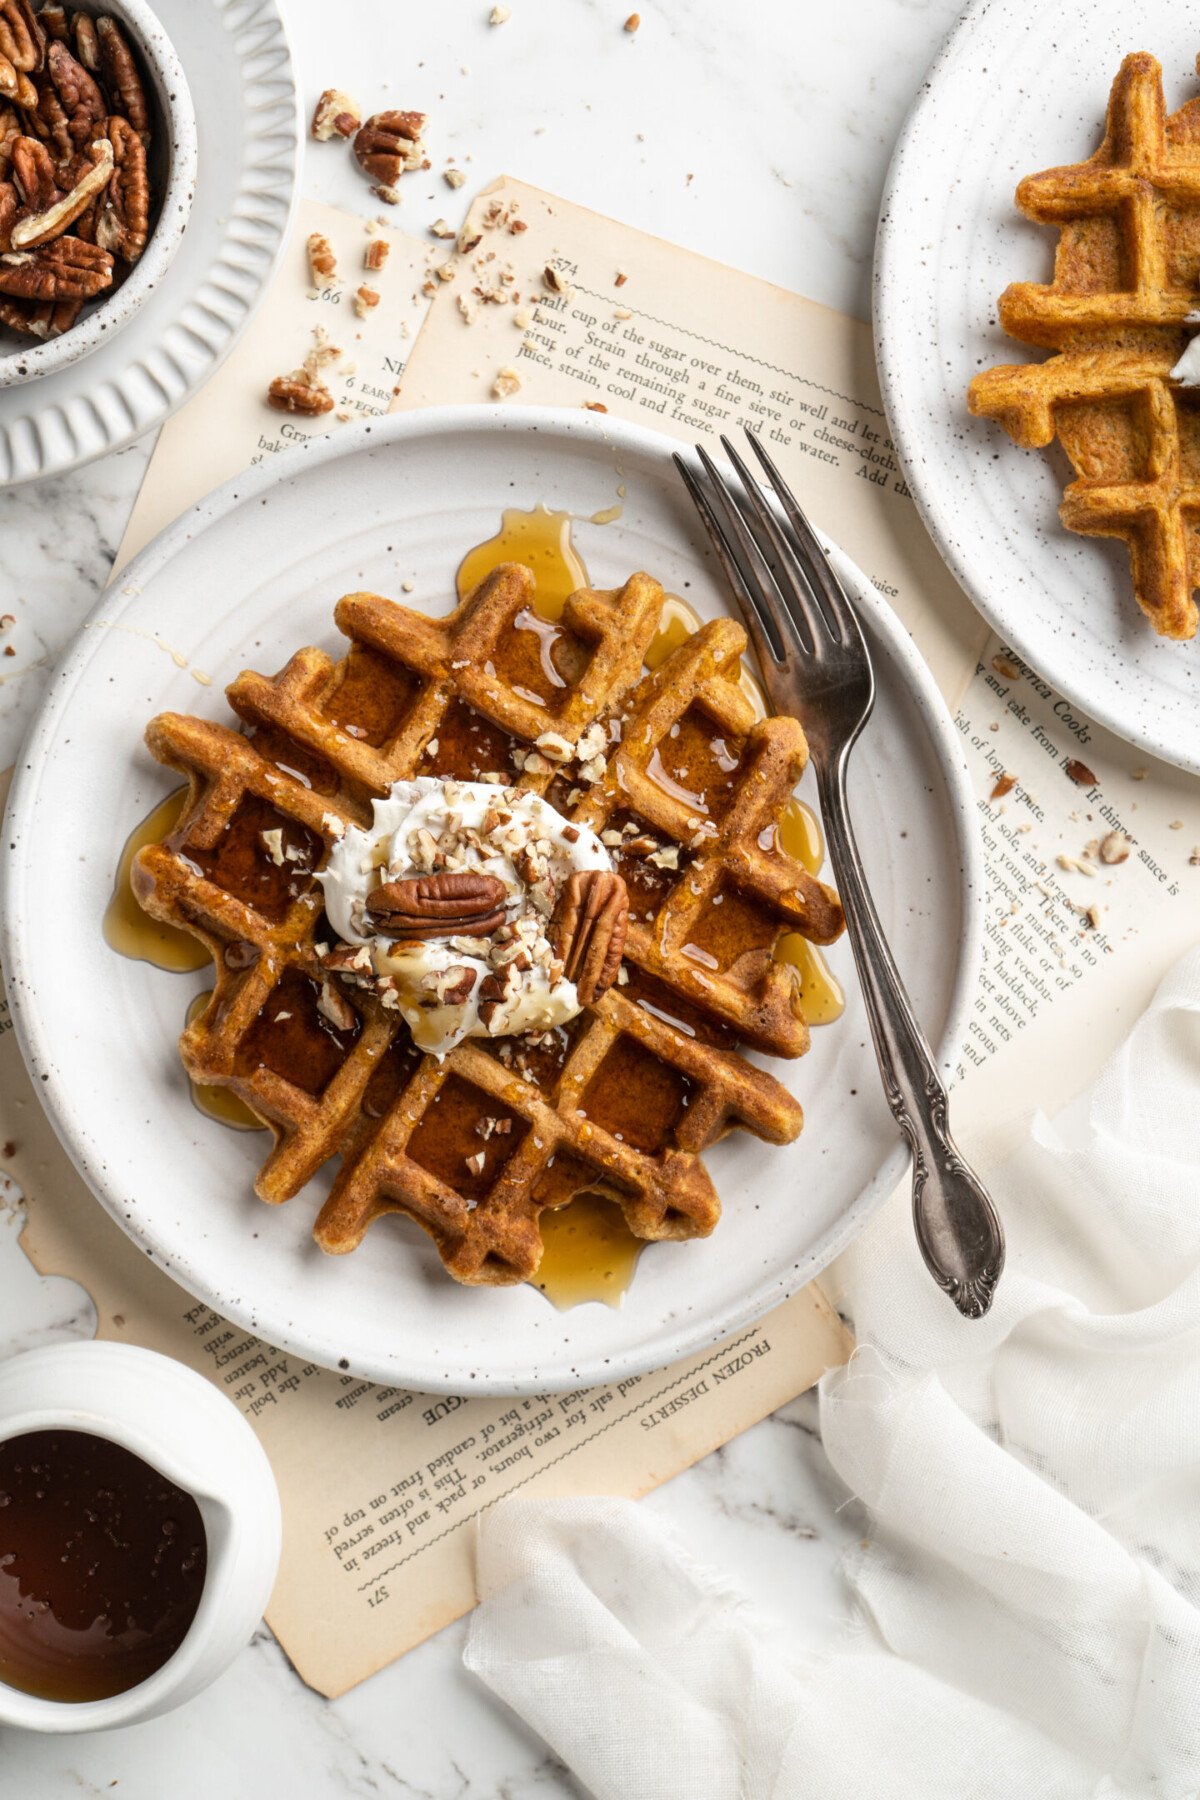 Overhead view of a plate with a fork, a pumpkin waffle, a dollop of whipped coconut cream, and candied pecans, next to a plate with anotherwaffle